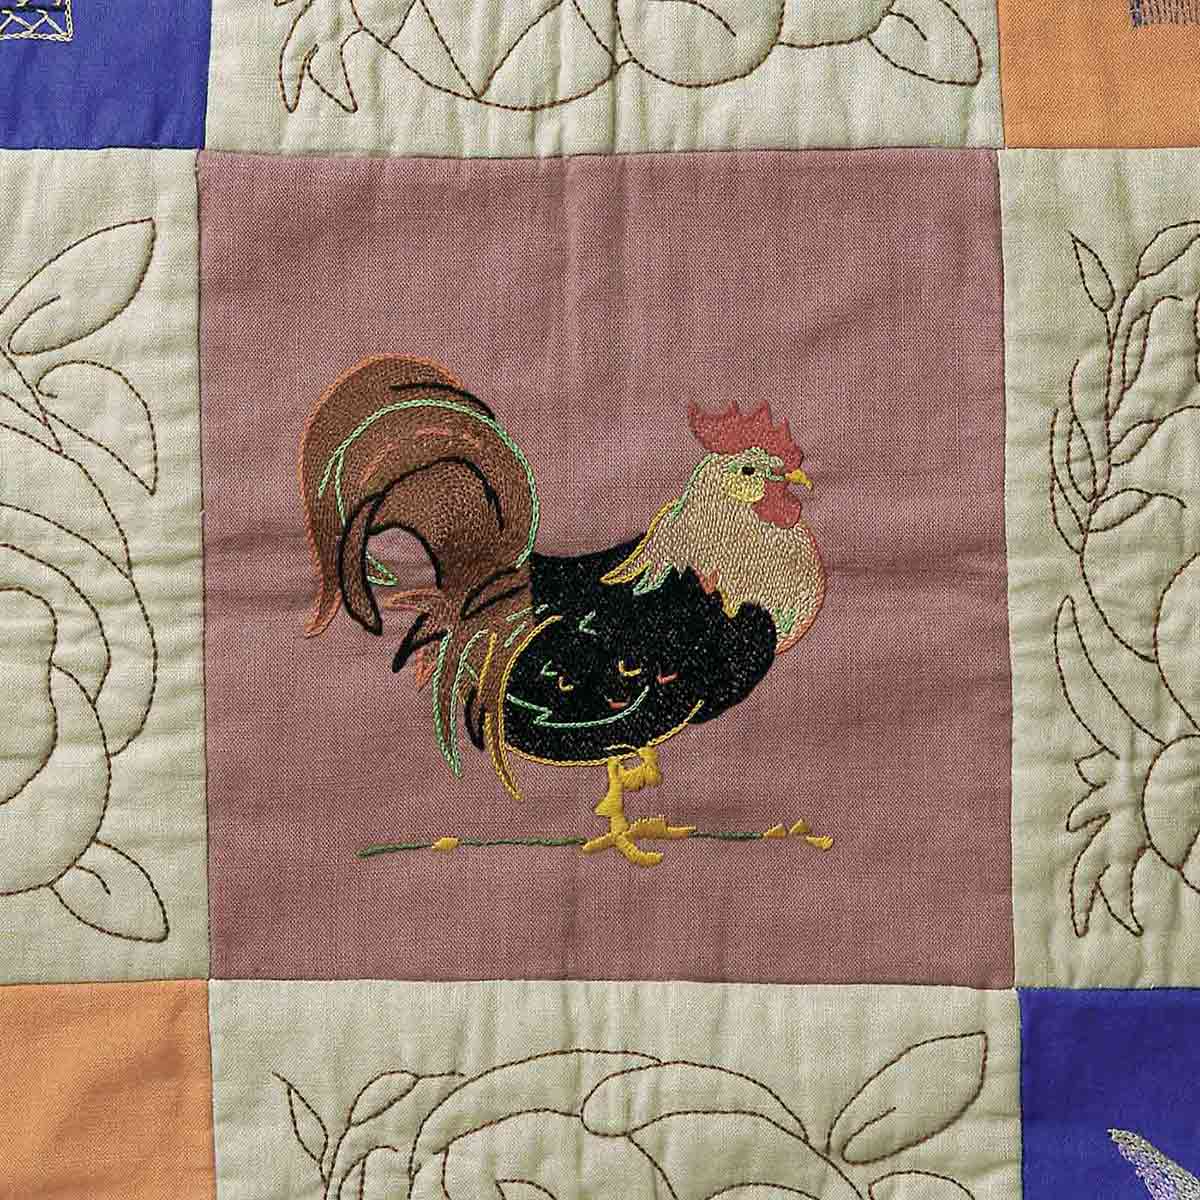 Close up quilt detail of a rooster embroidered in one of the squares. - click to view larger image